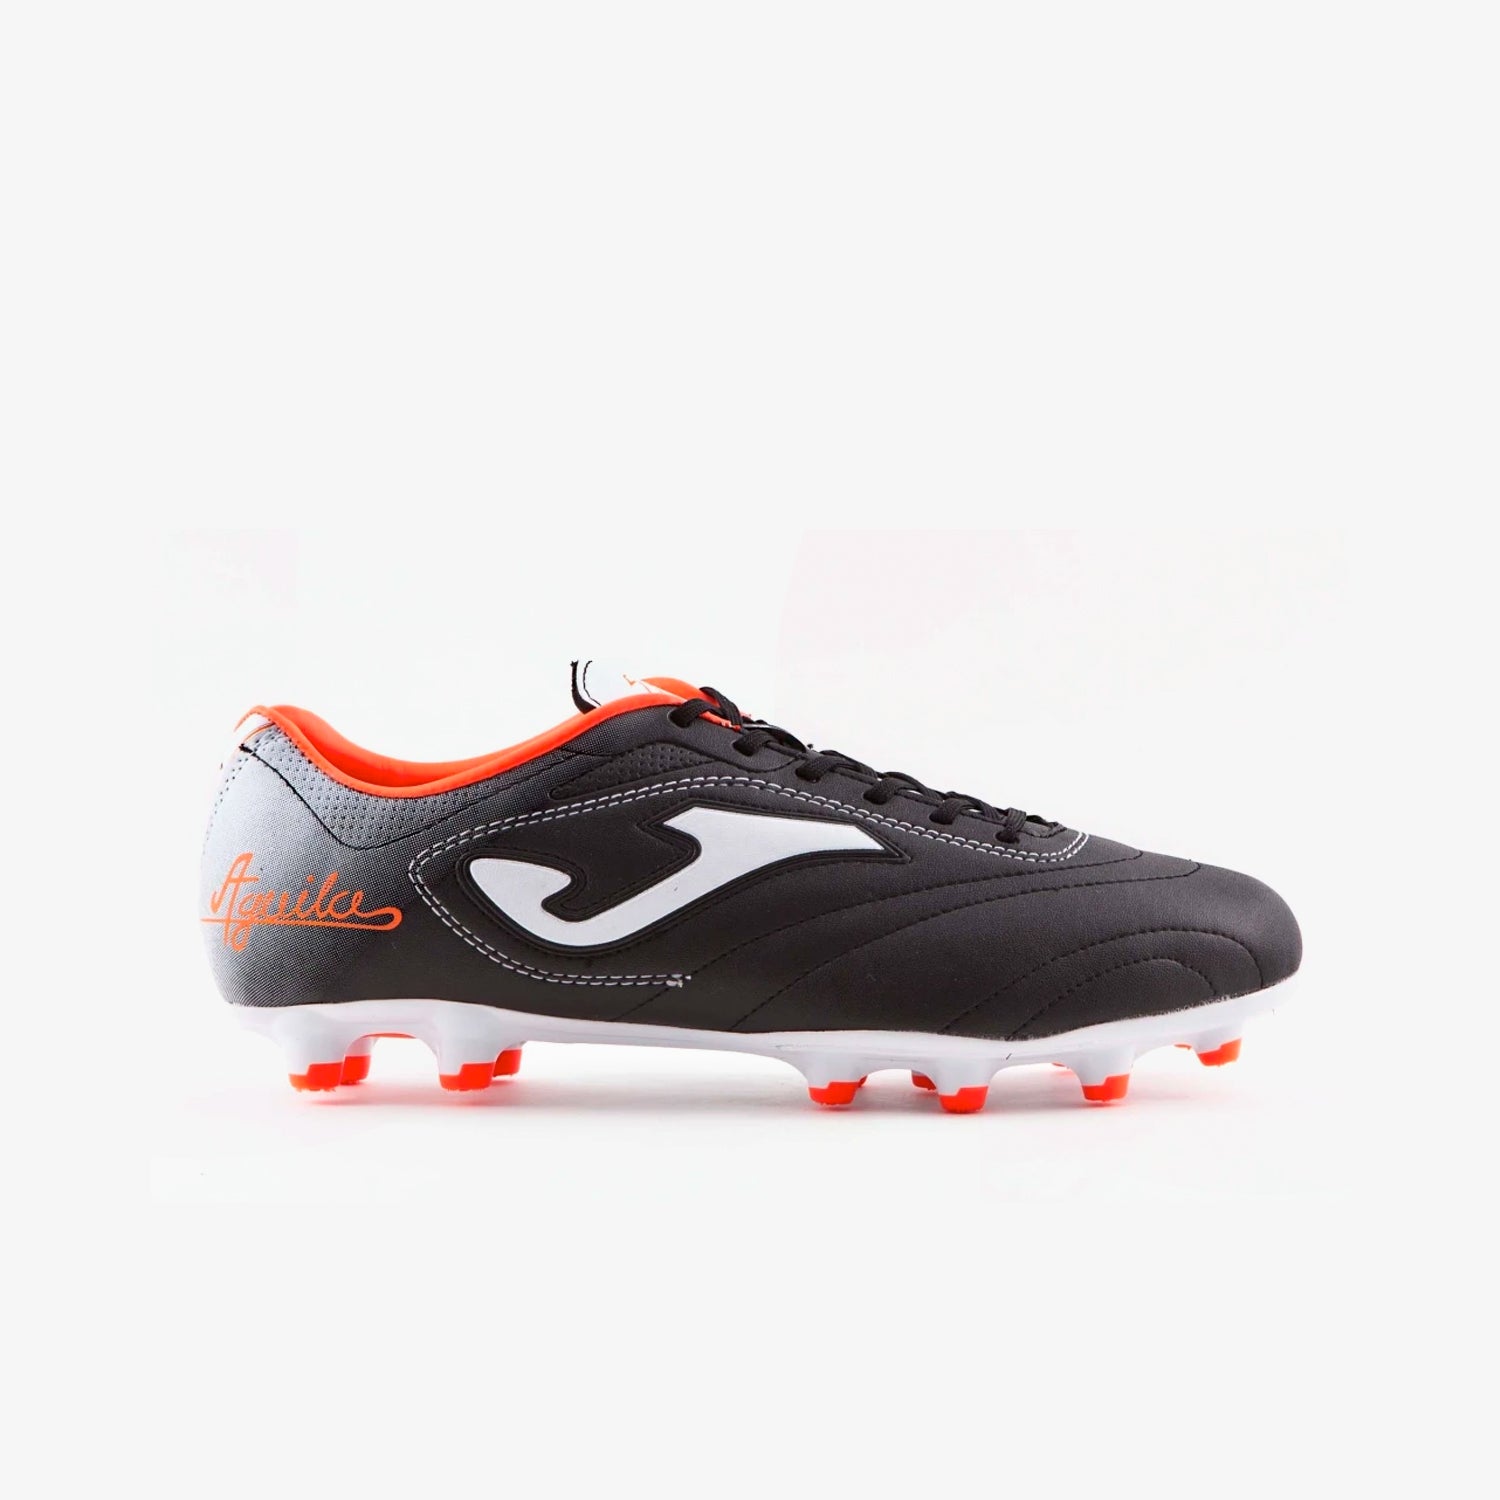 Aguila 401 Firmground Soccer Shoes